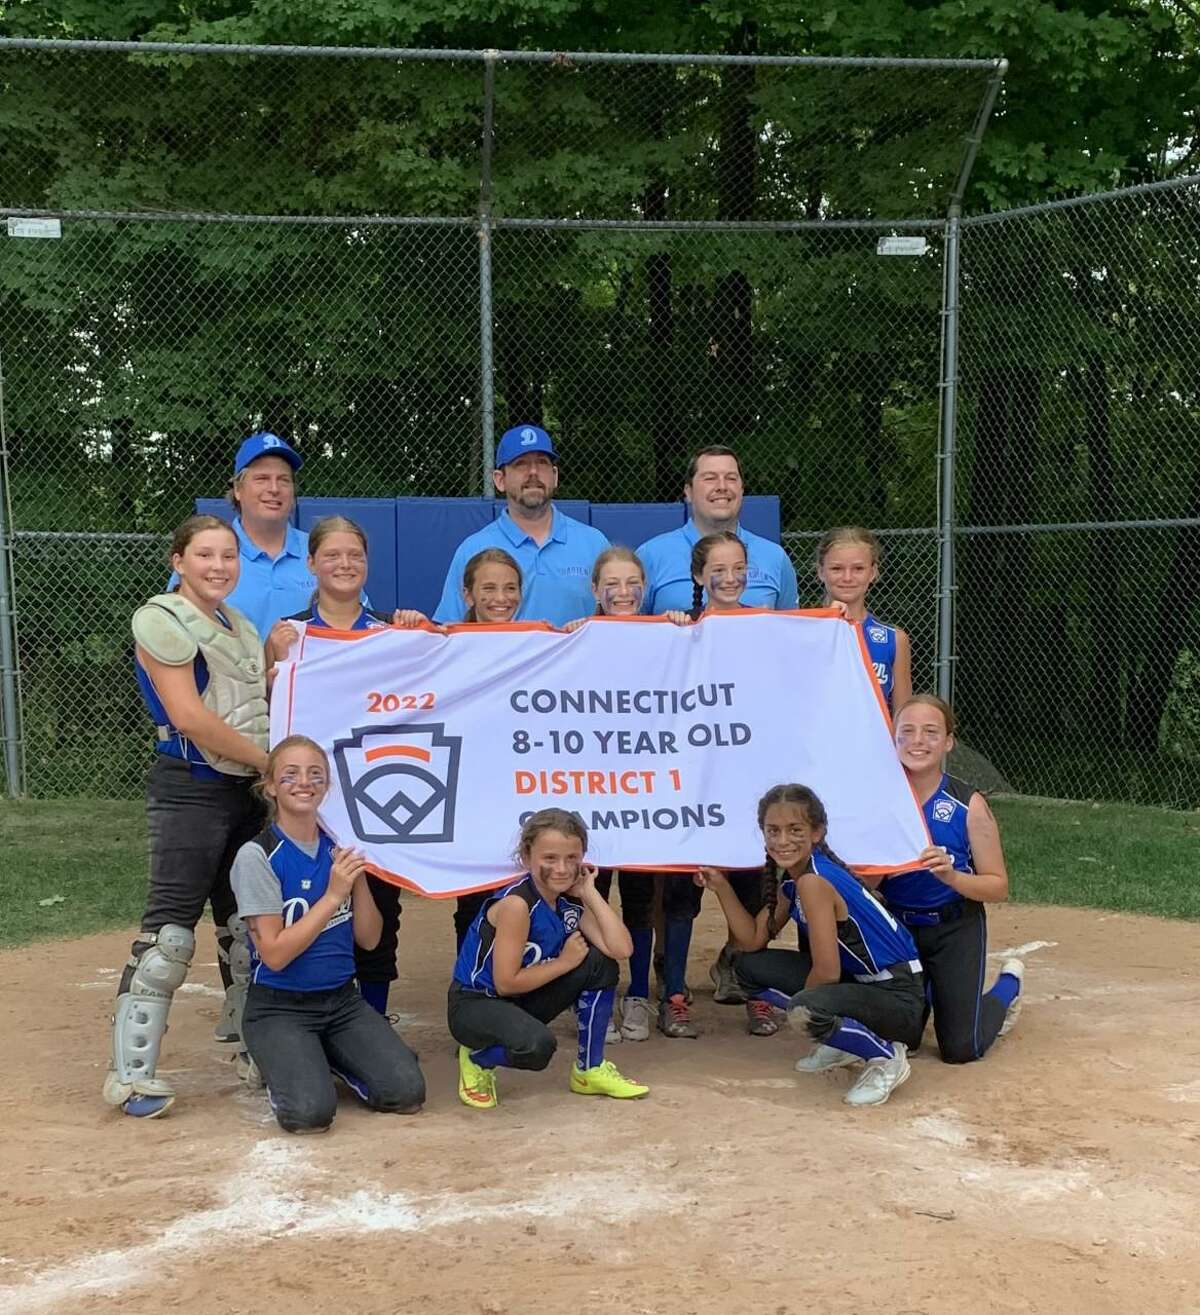 The Darien 10 and under softball team won the District 1 championship this summer.